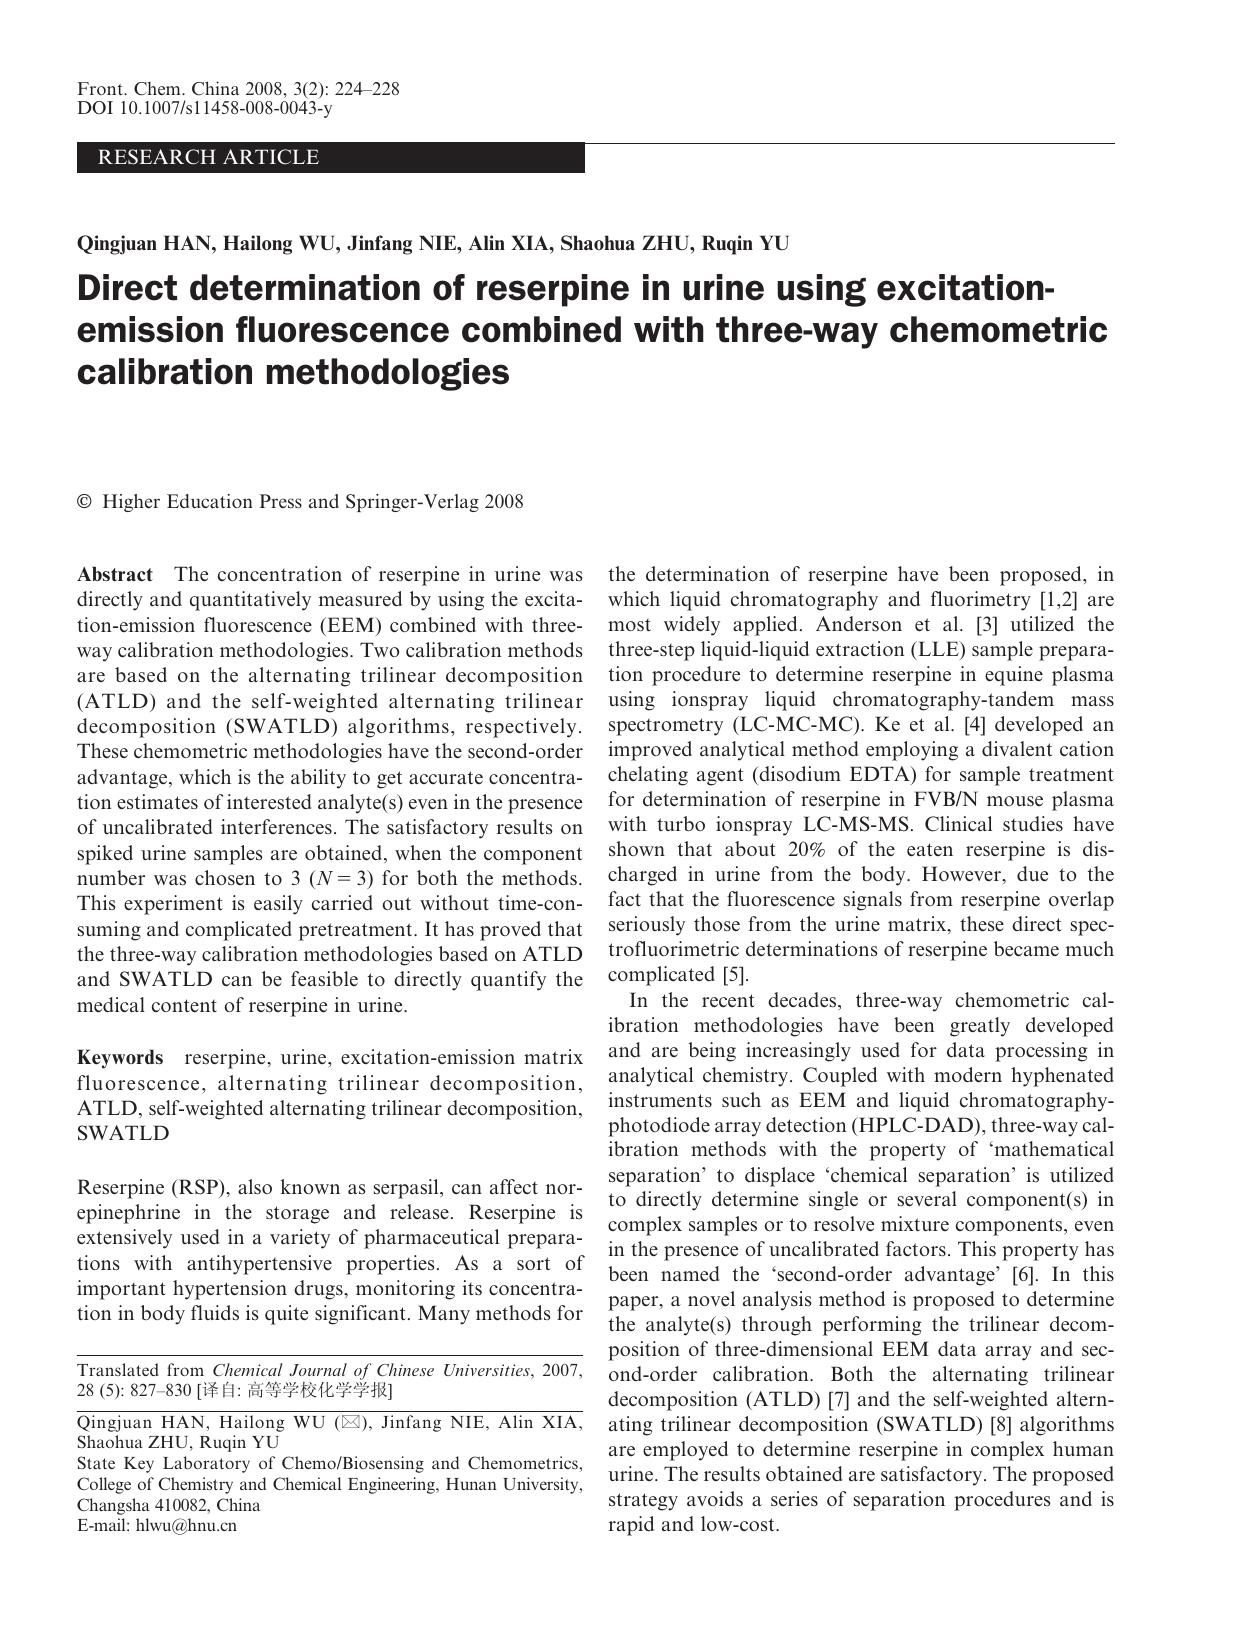 Direct determination of reserpine in urine using excitation-emission fluorescence combined with three-way chemometric calibration methodologies by Unknown